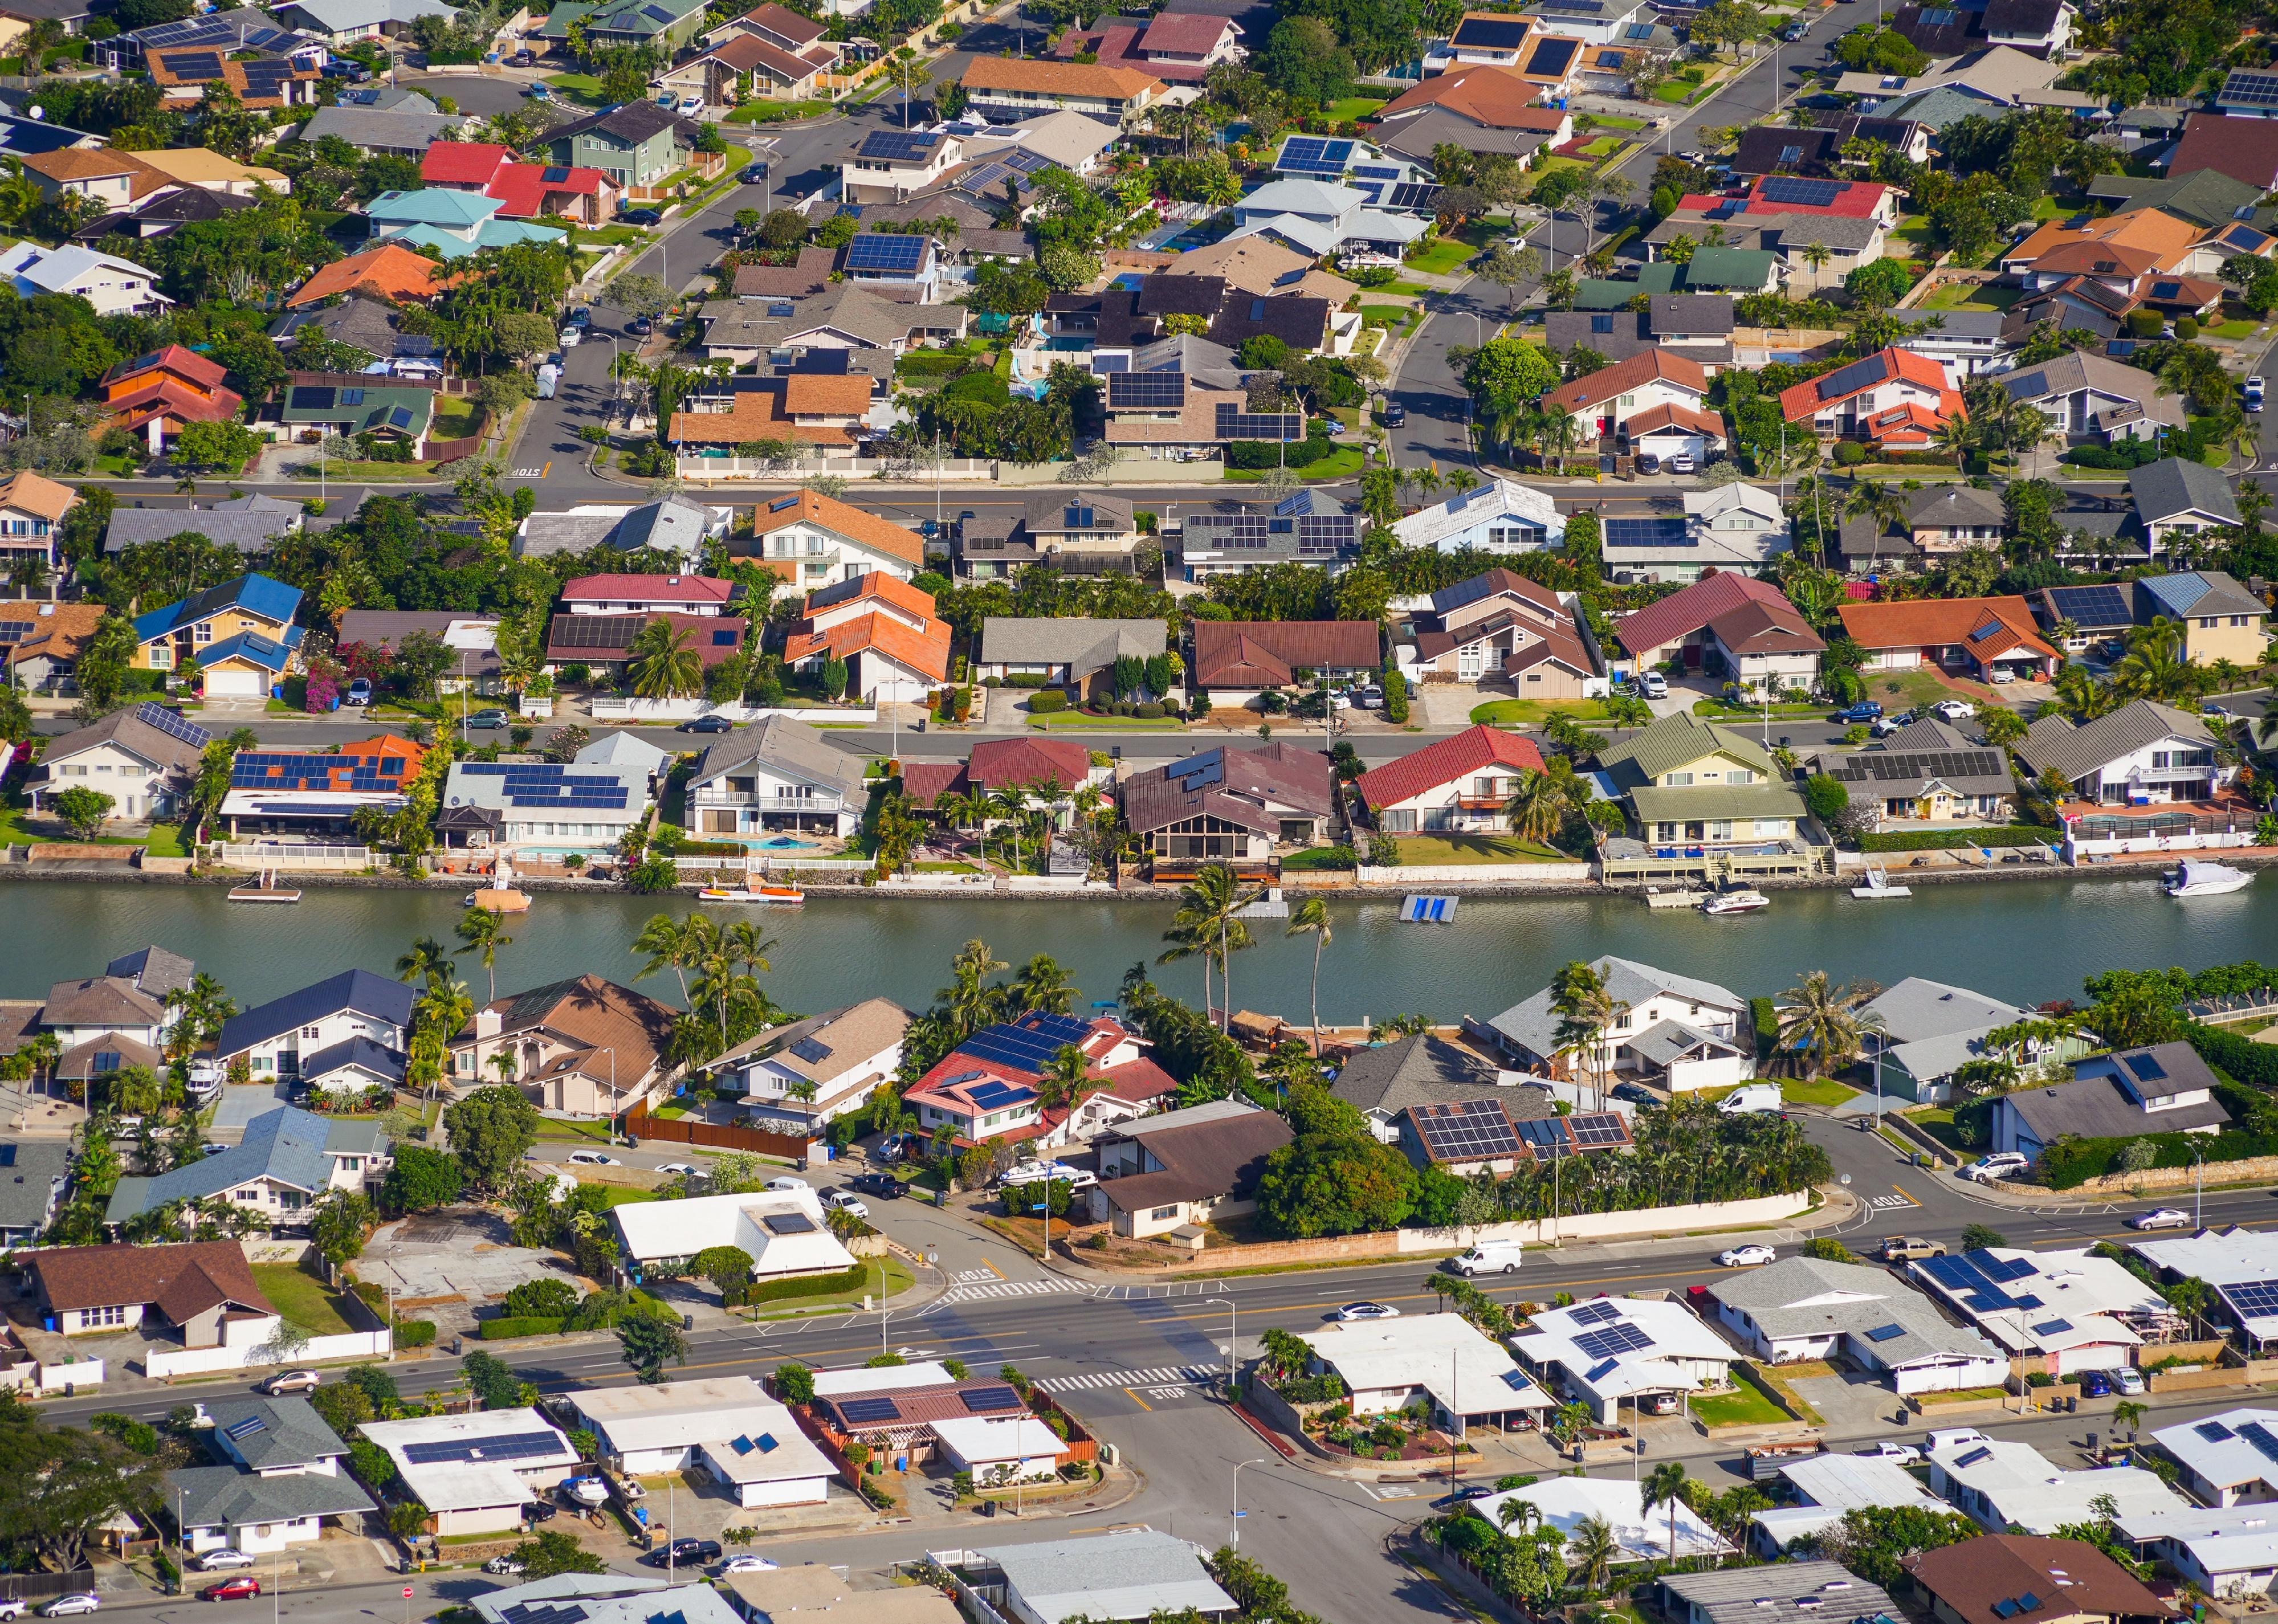 Aerial view of the rooftops of the Hawaii Kai residential neighborhood.